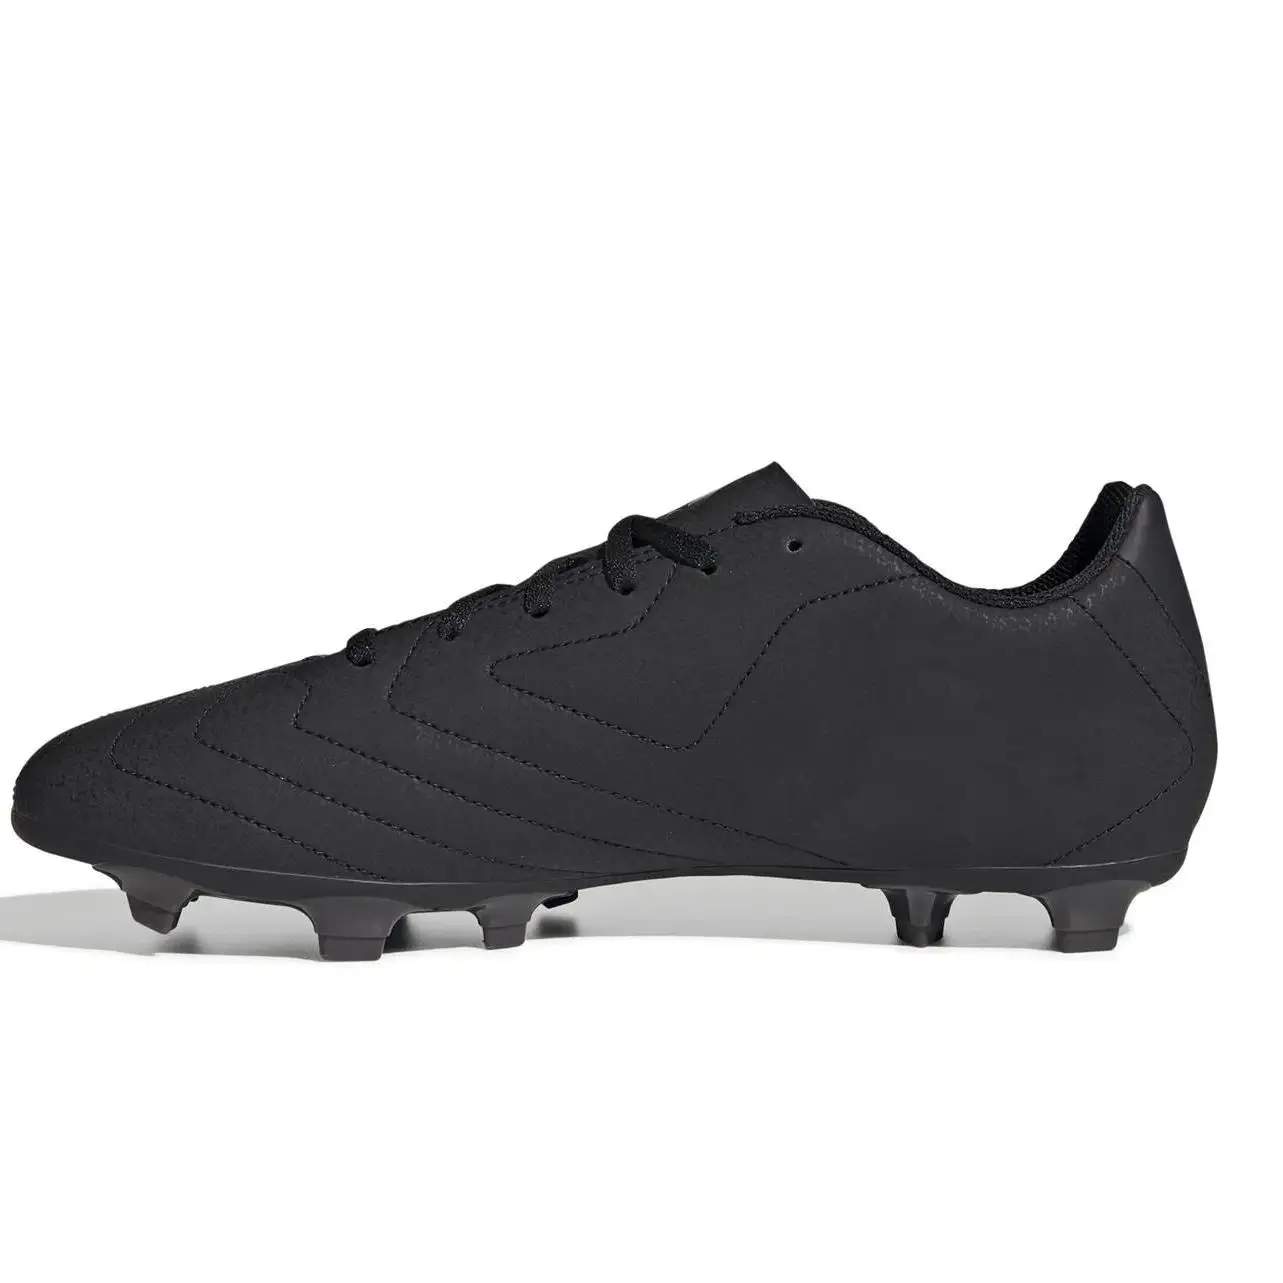 First Suppliers Outdoor Field Professional Metal Studs Soccer Shoes Football Cleats For Men